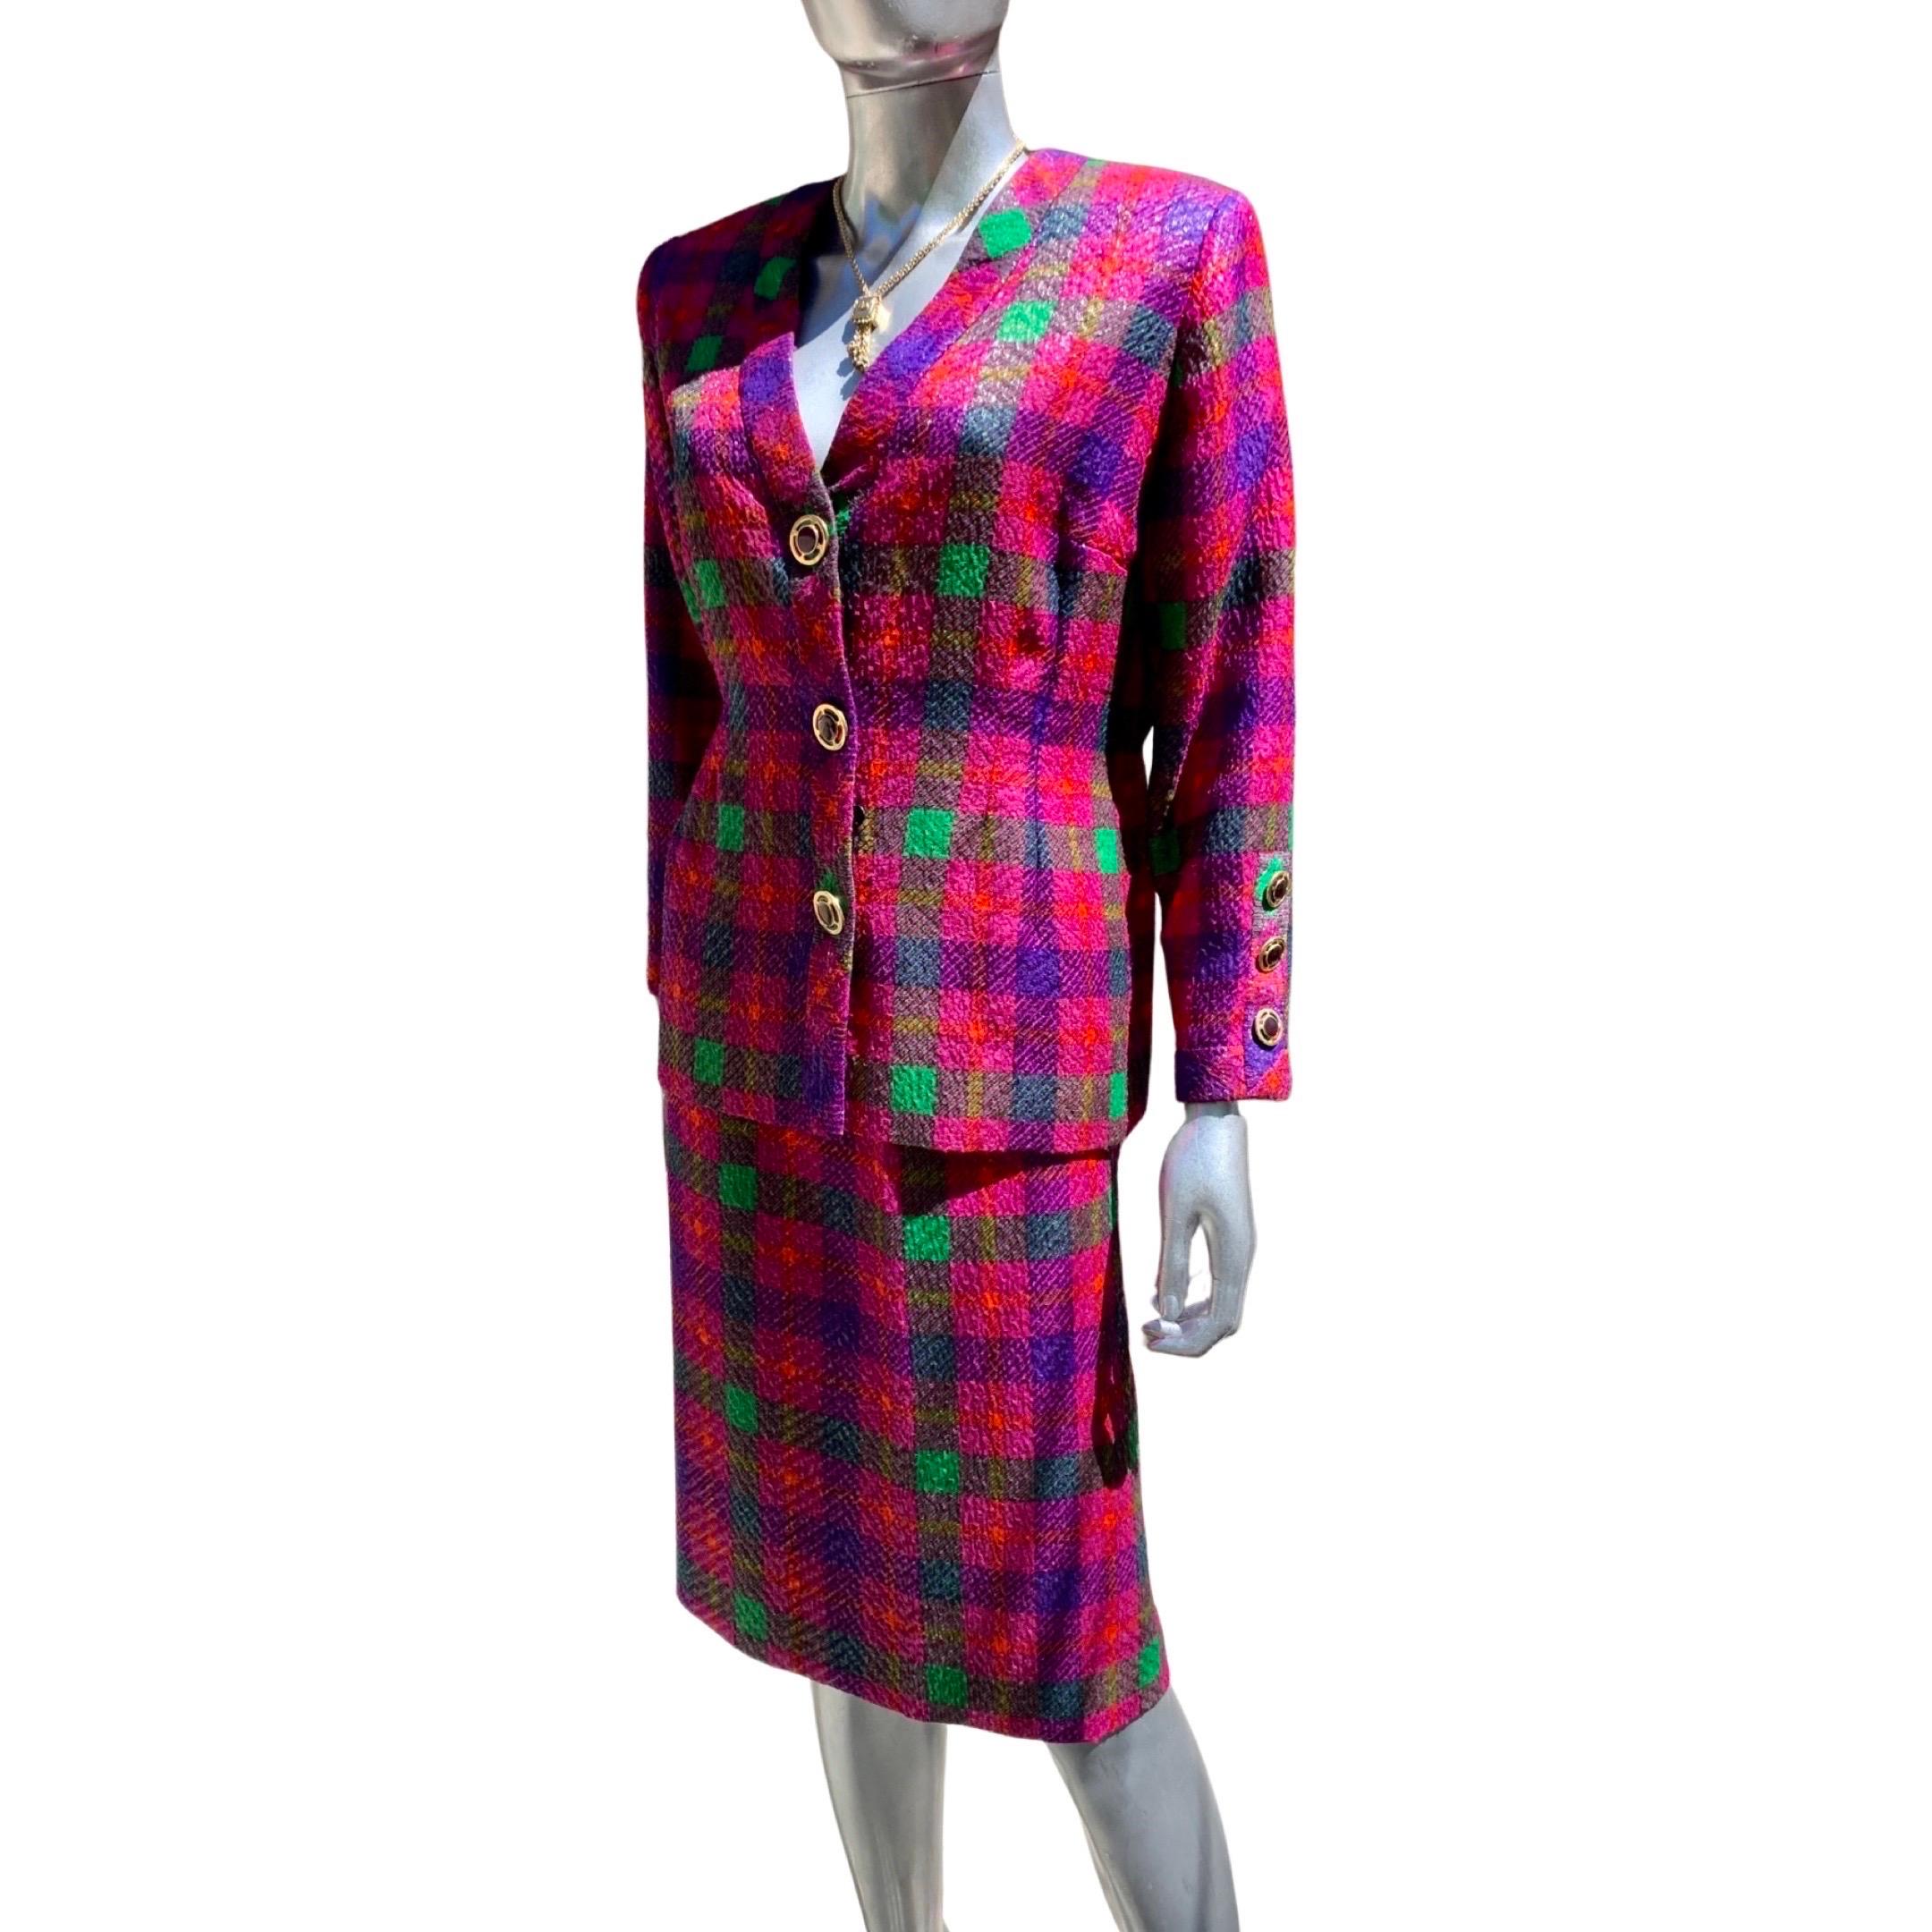 This beautiful custom made suit cane from the closet of a Philanthropist/Socialite Fashionista’s Closet. Custom made in Europe, one of a kind, in the 80s. The fabric is super luxe. A jewel-tone plaid woven with metallic threads. The suit is in the